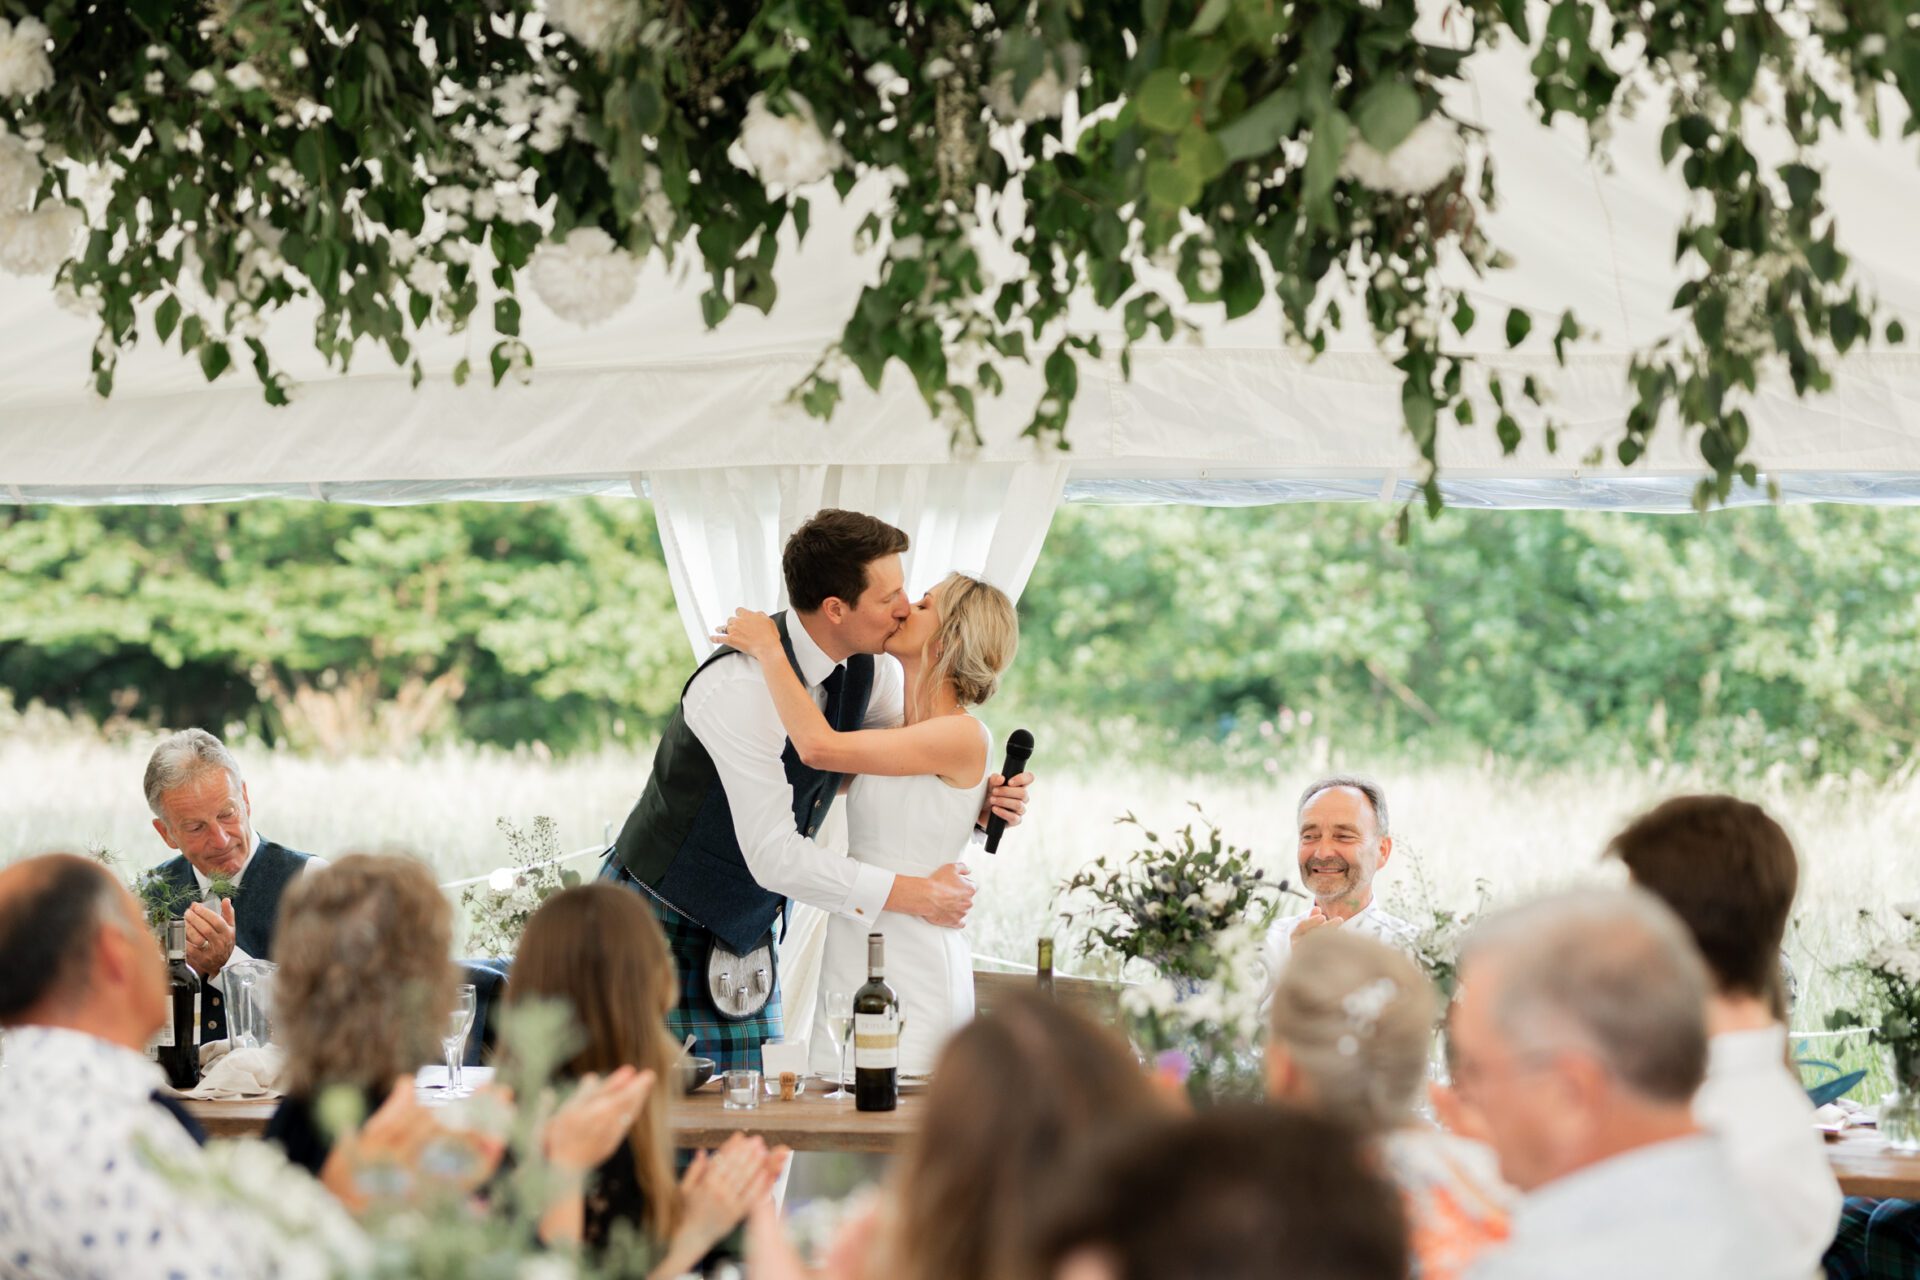 The bride and groom share a kiss during speeches at their Devon marquee wedding